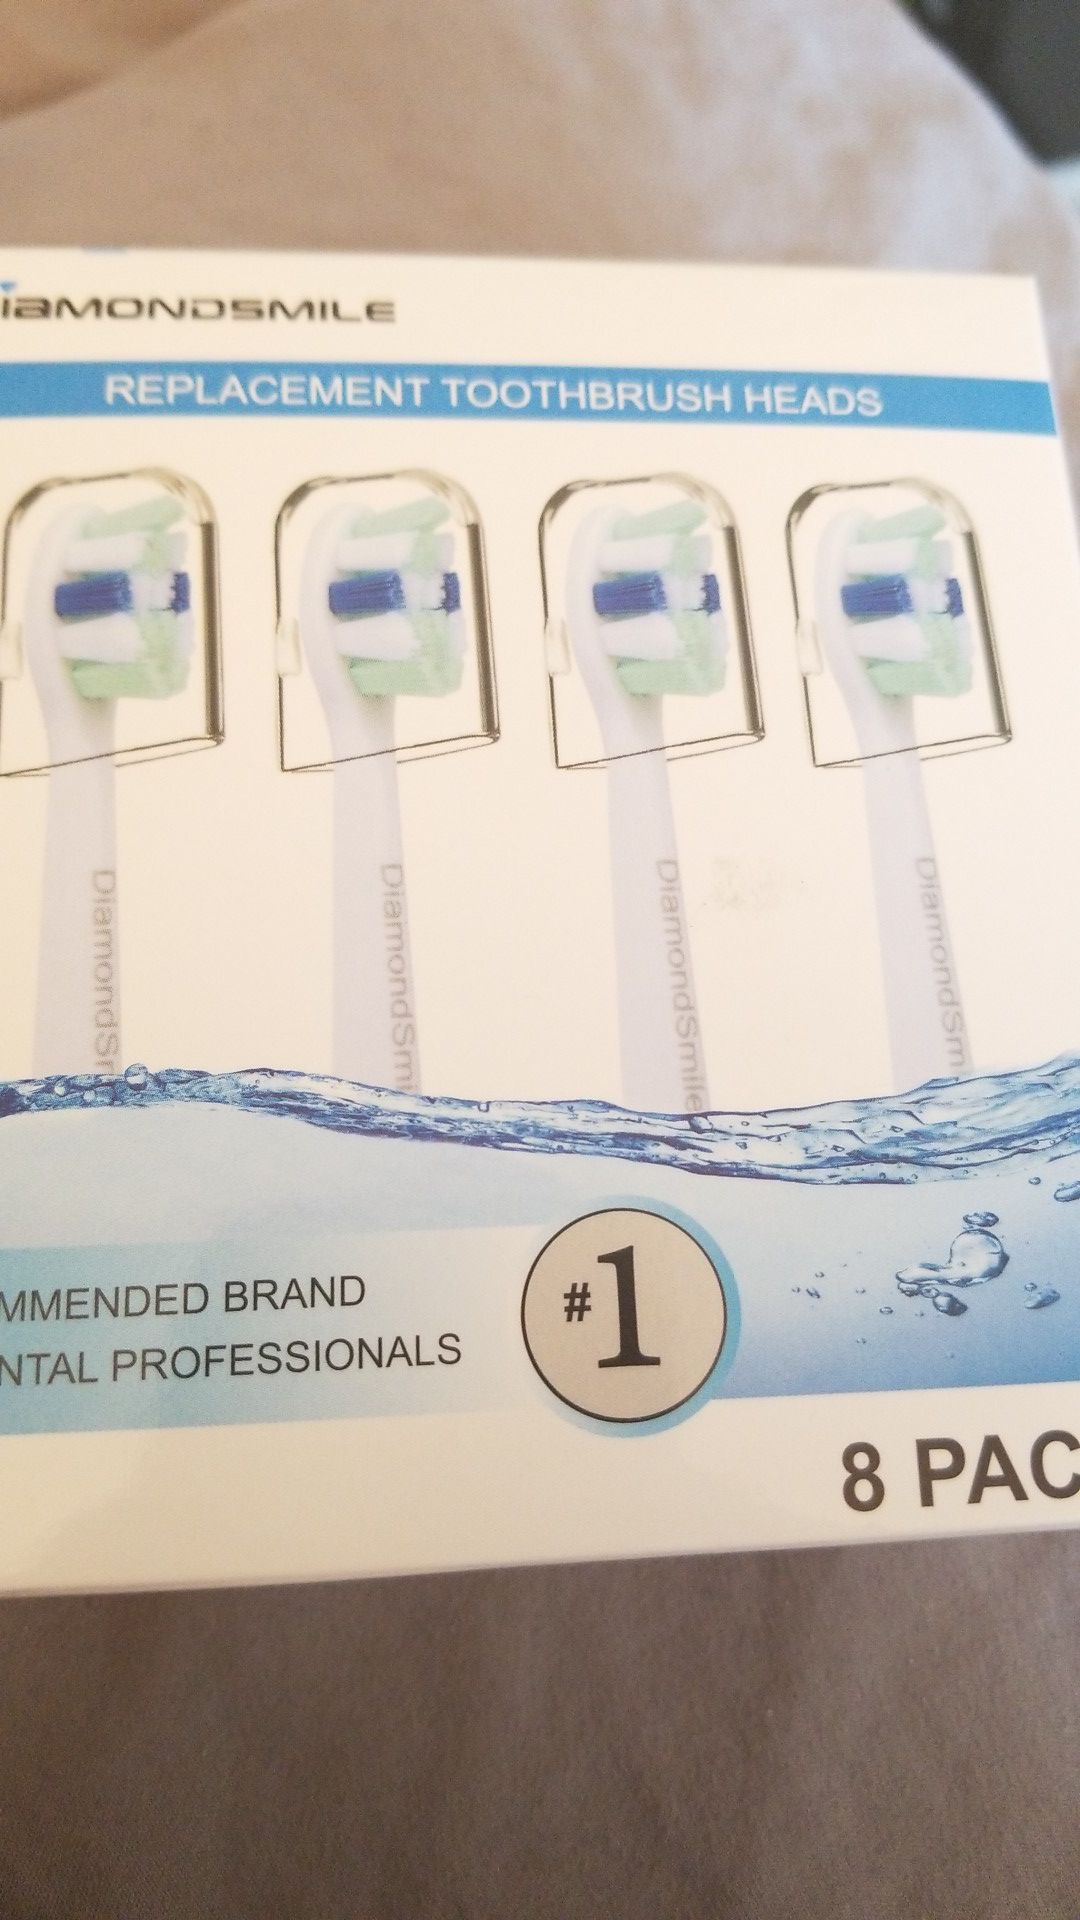 Replacement Toothbrush heads